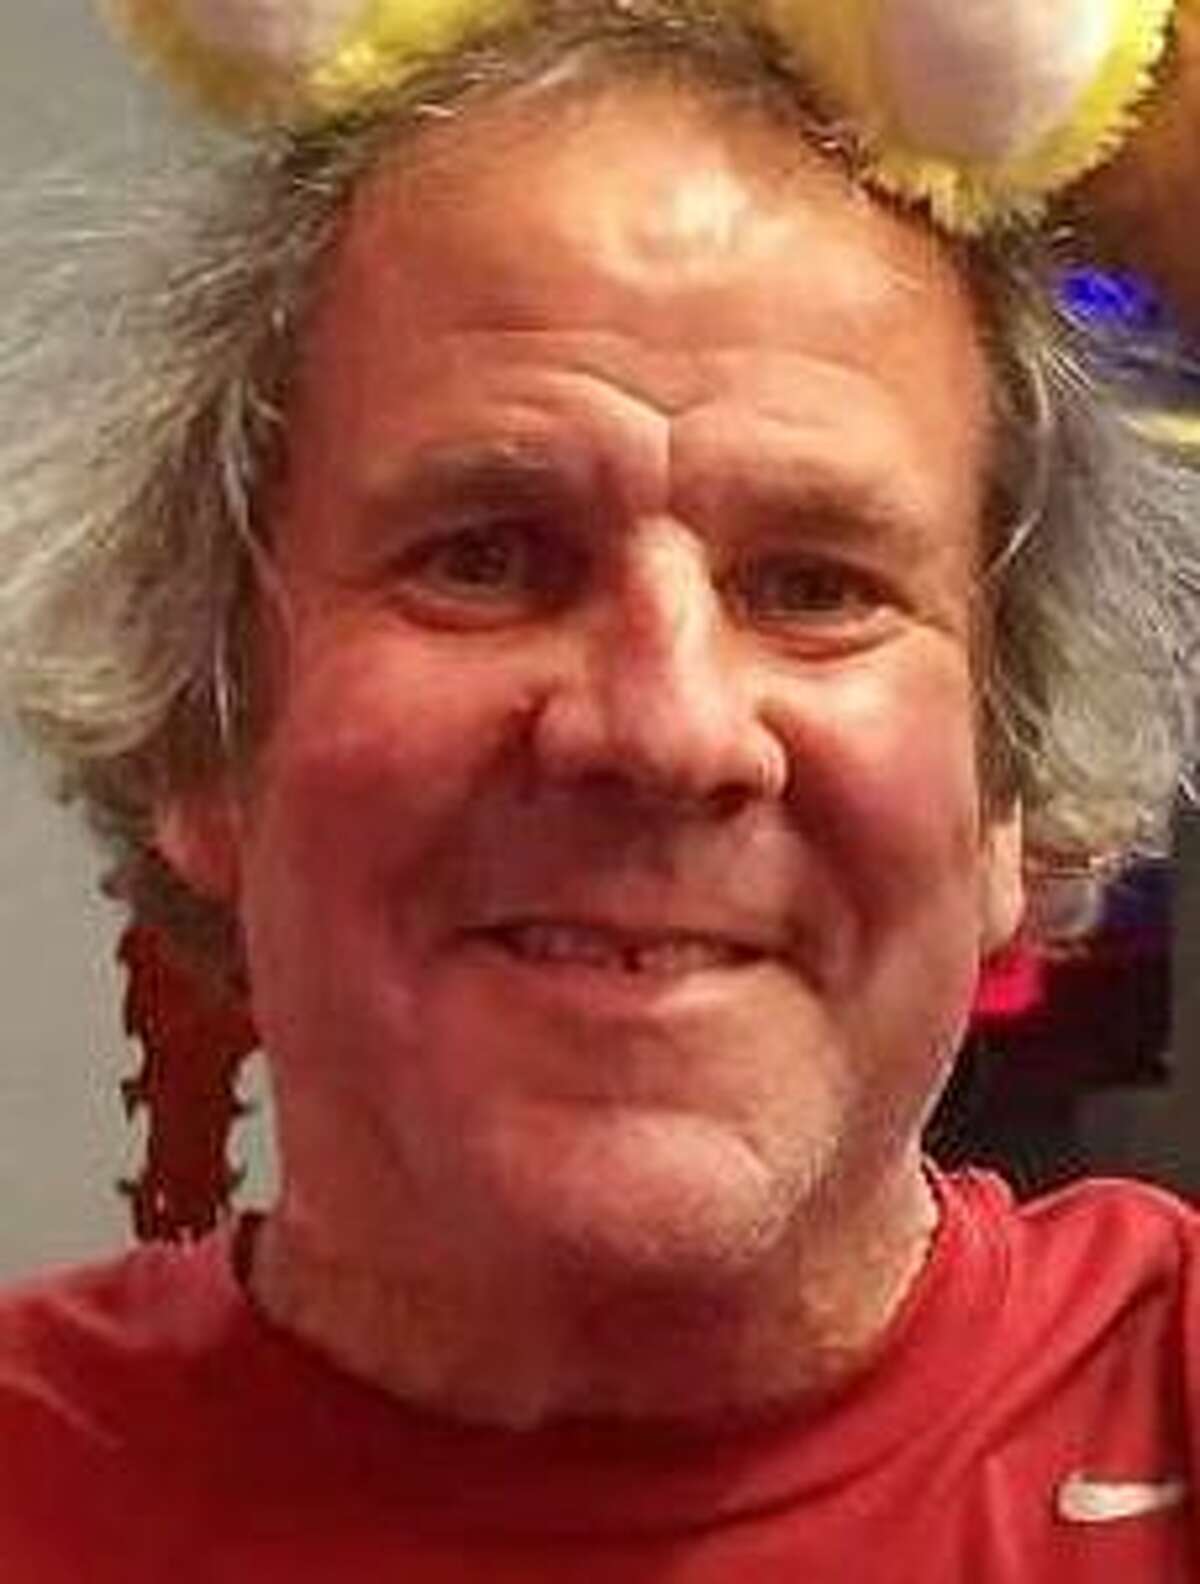 Kenneth Woodd-Cahusac, 61, was found dead on the shoreline of the Mianus River in Greenwich, Conn. on Thursday, March 16, 2017.